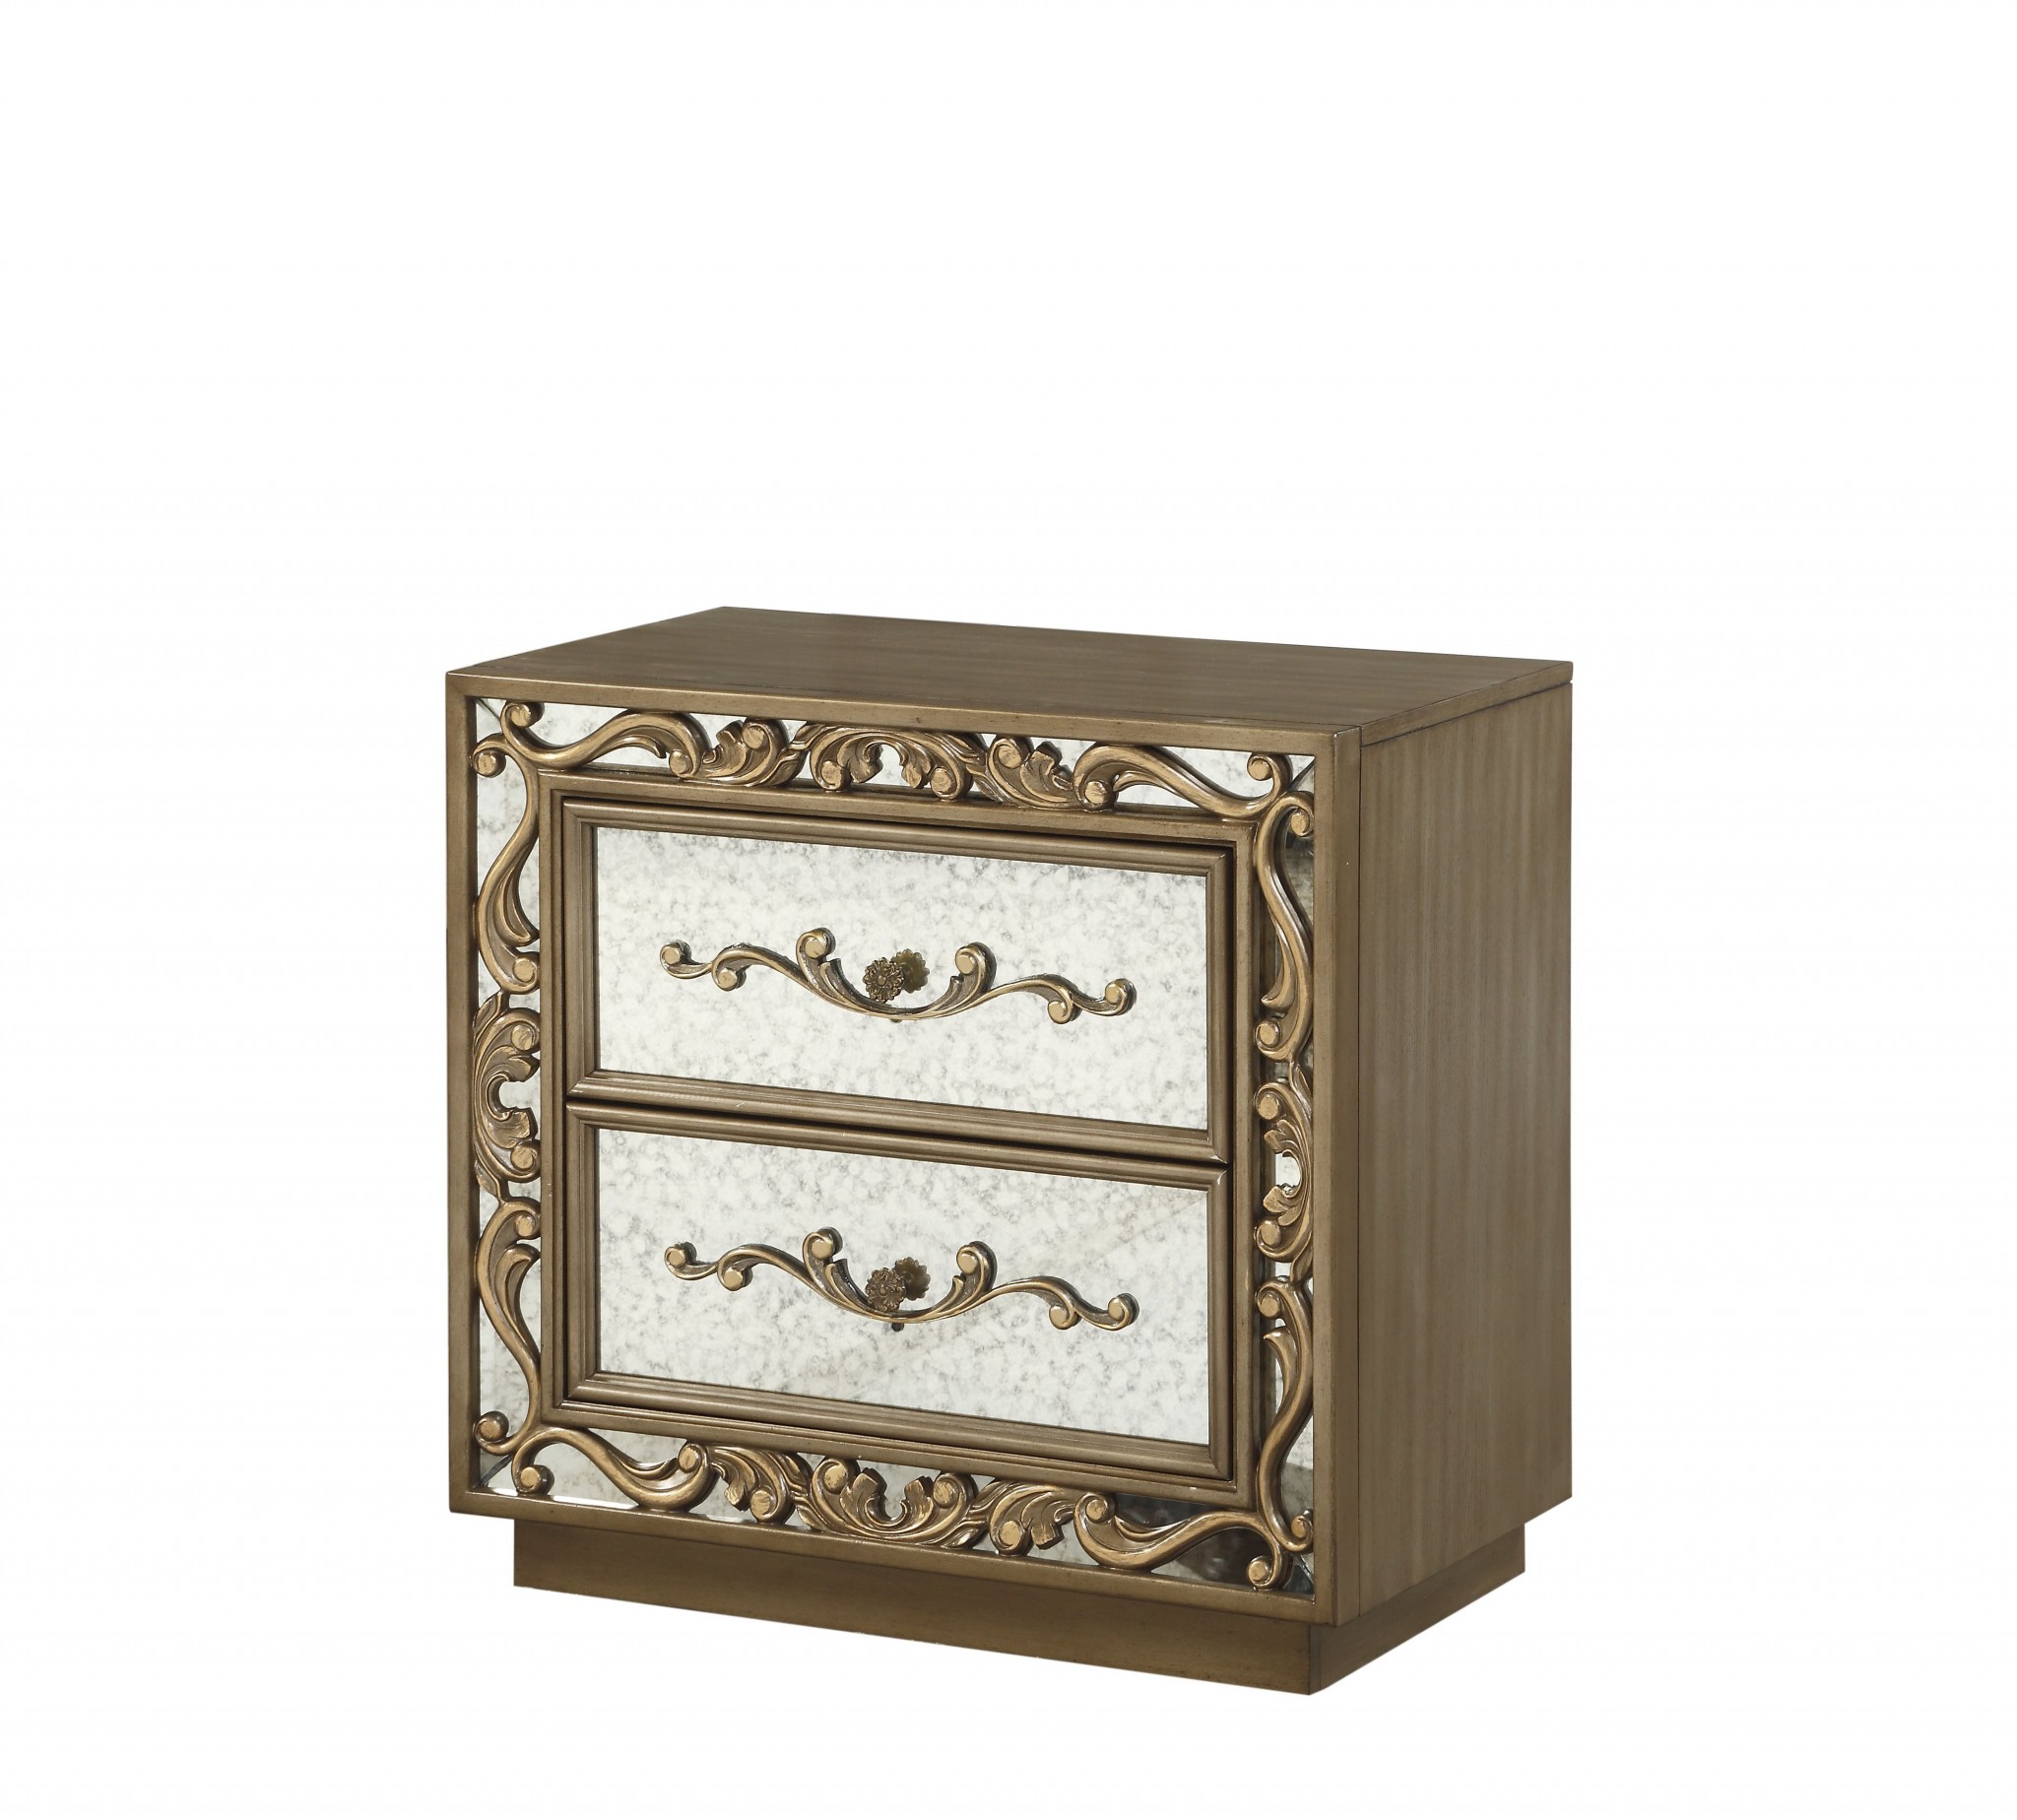 32" X 18" X 28" Antique Gold And Mirrored Poplar Nightstand